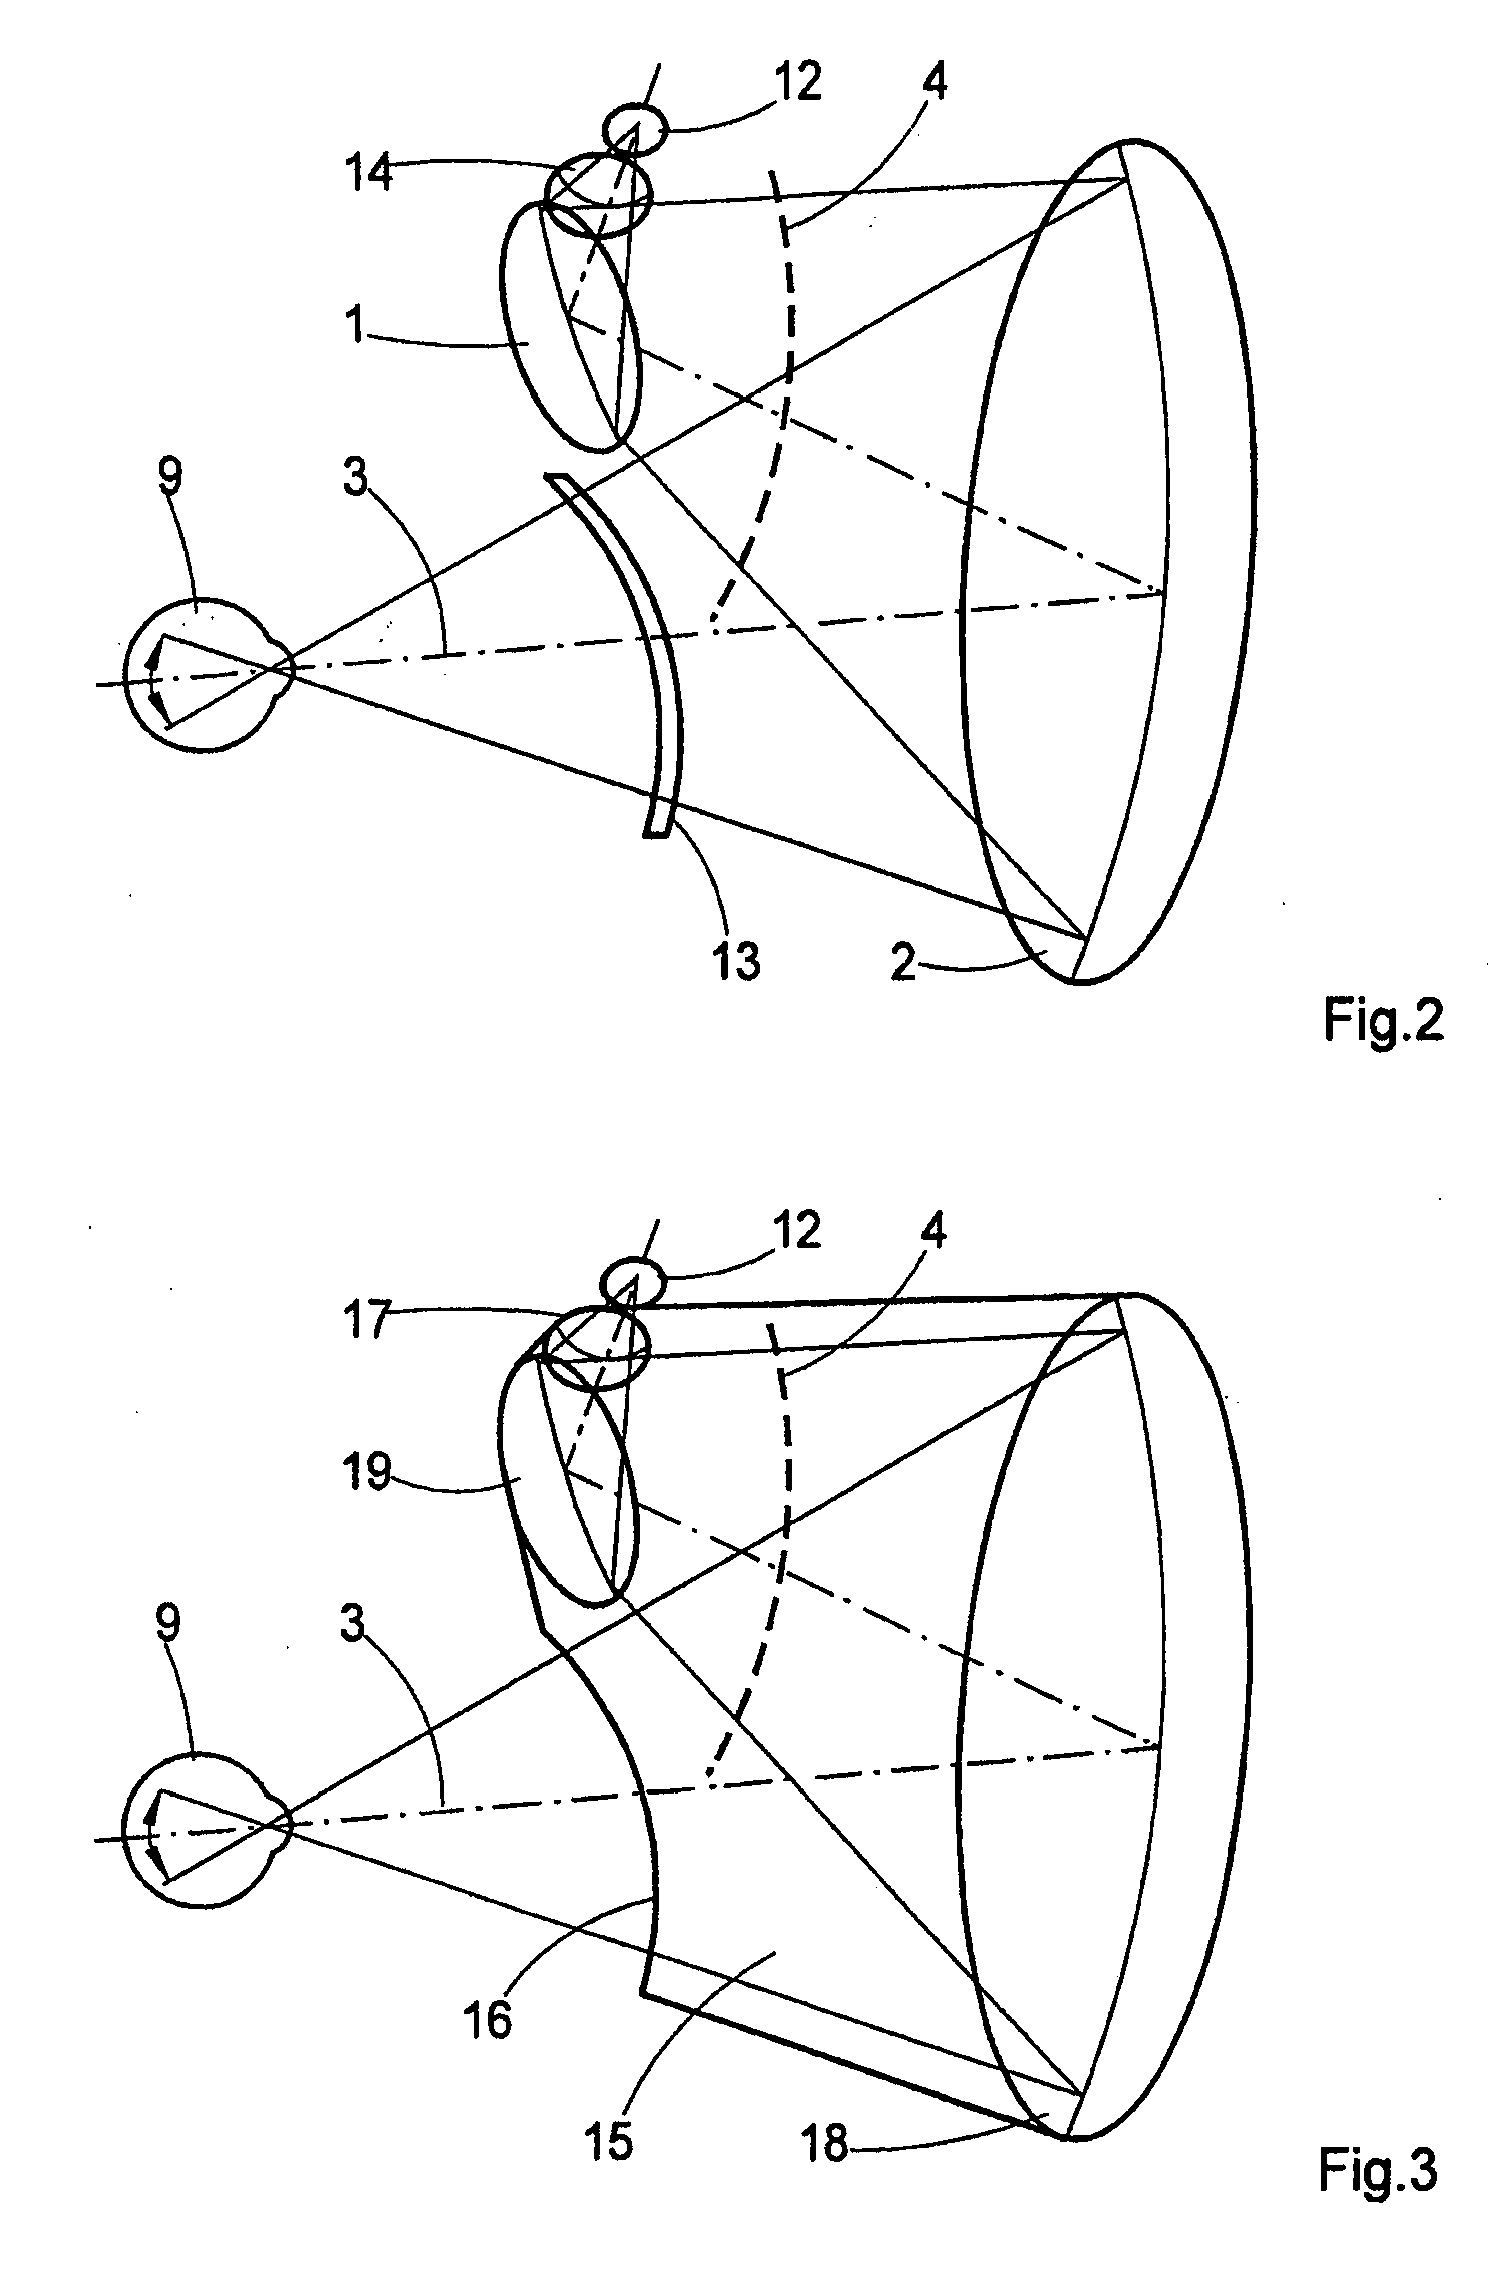 Optical system for a fundus camera